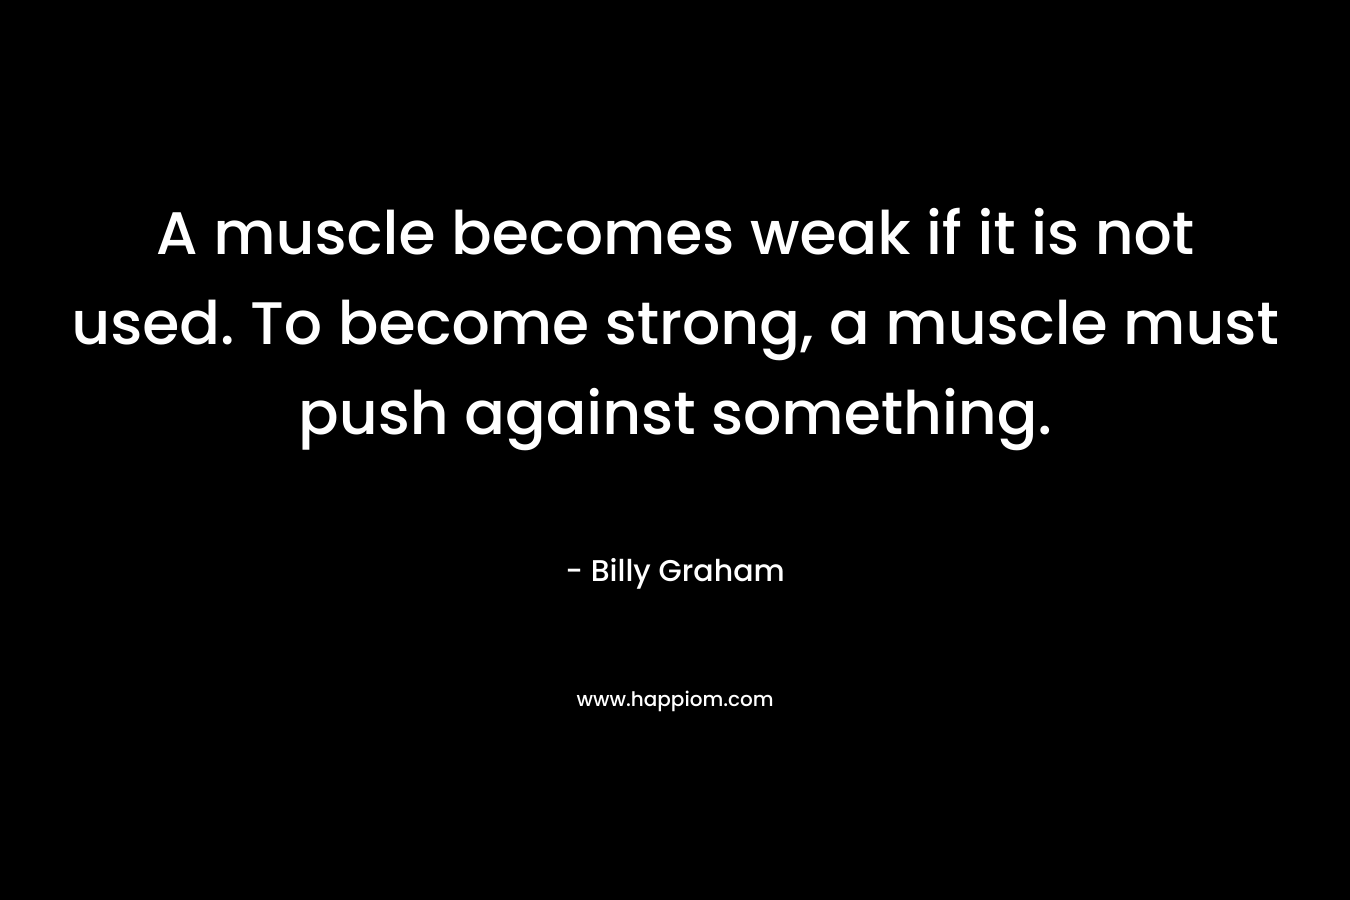 A muscle becomes weak if it is not used. To become strong, a muscle must push against something.